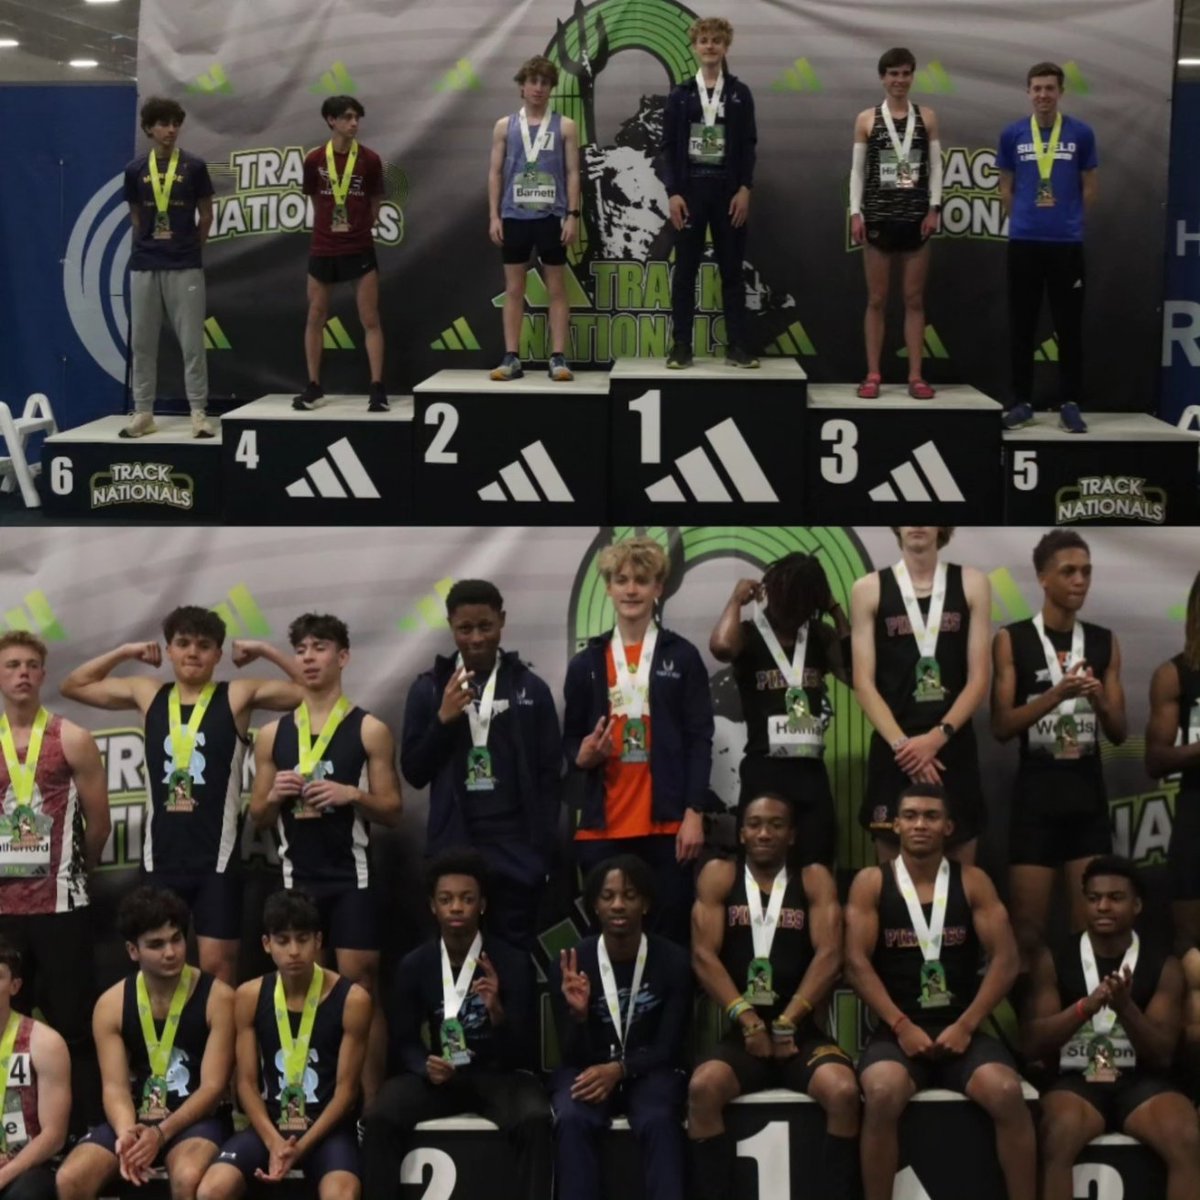 Congratulations to Caleb Tenney for placing 1st in the 2 Mile Run and 1600m SMR (Justin T, Trenton B, Carson M, Caleb T) team for placing 2nd at the Adidas Indoor Nationals in VA Beach @miaaathletics @sunvarsity @WashPostHS @laurelleader @Pallotti_HS @PallottiTrack #TheSVPway